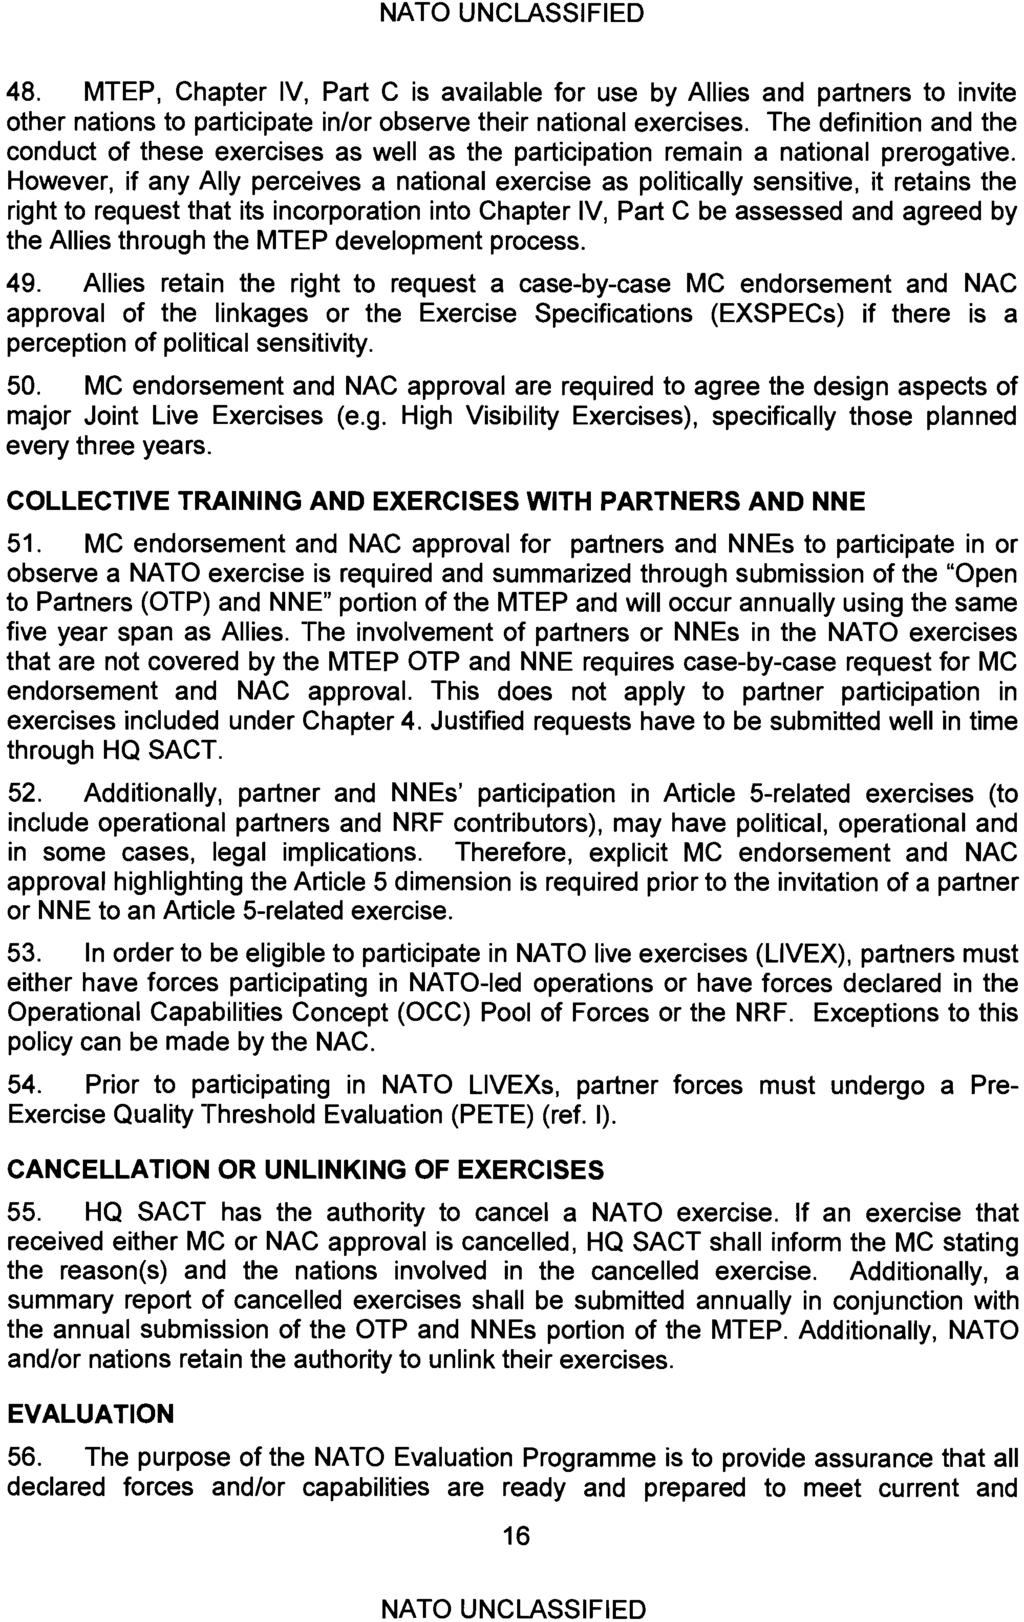 48. MTEP, Chapter IV, Part C is available for use by Allies and partners to invite other nations to participate in/or observe their national exercises.